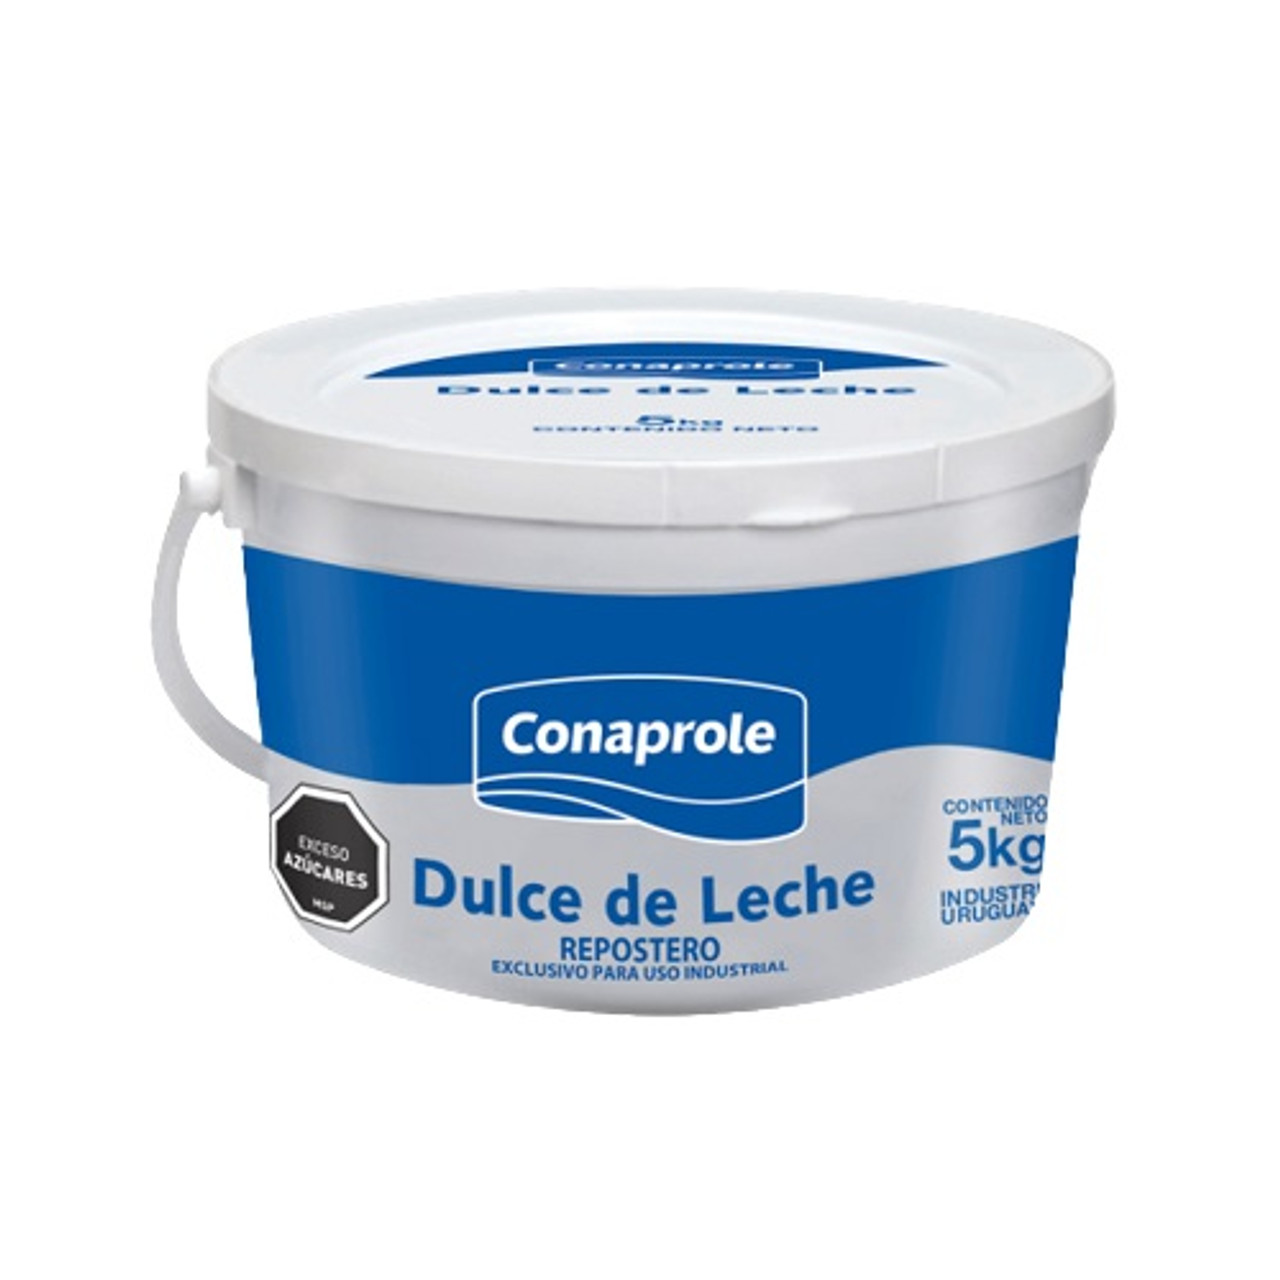 Conaprole Dulce de Leche Repostero Confectioner's Thicker Milk Caramel  Confiture for Bakeries, Cakes and Pastry, 5 kg / 11.02 lb bin - Pampa Direct